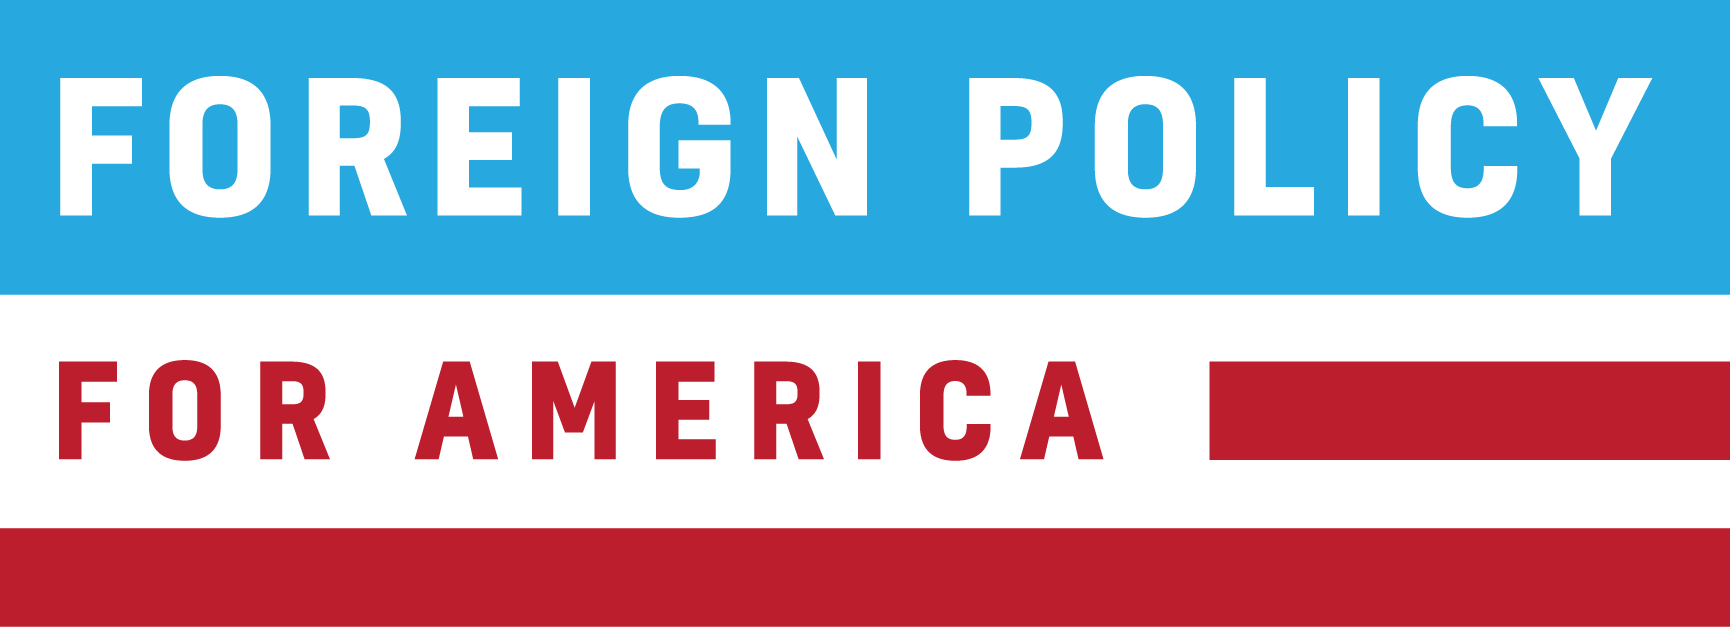 Foreign Policy for America logo